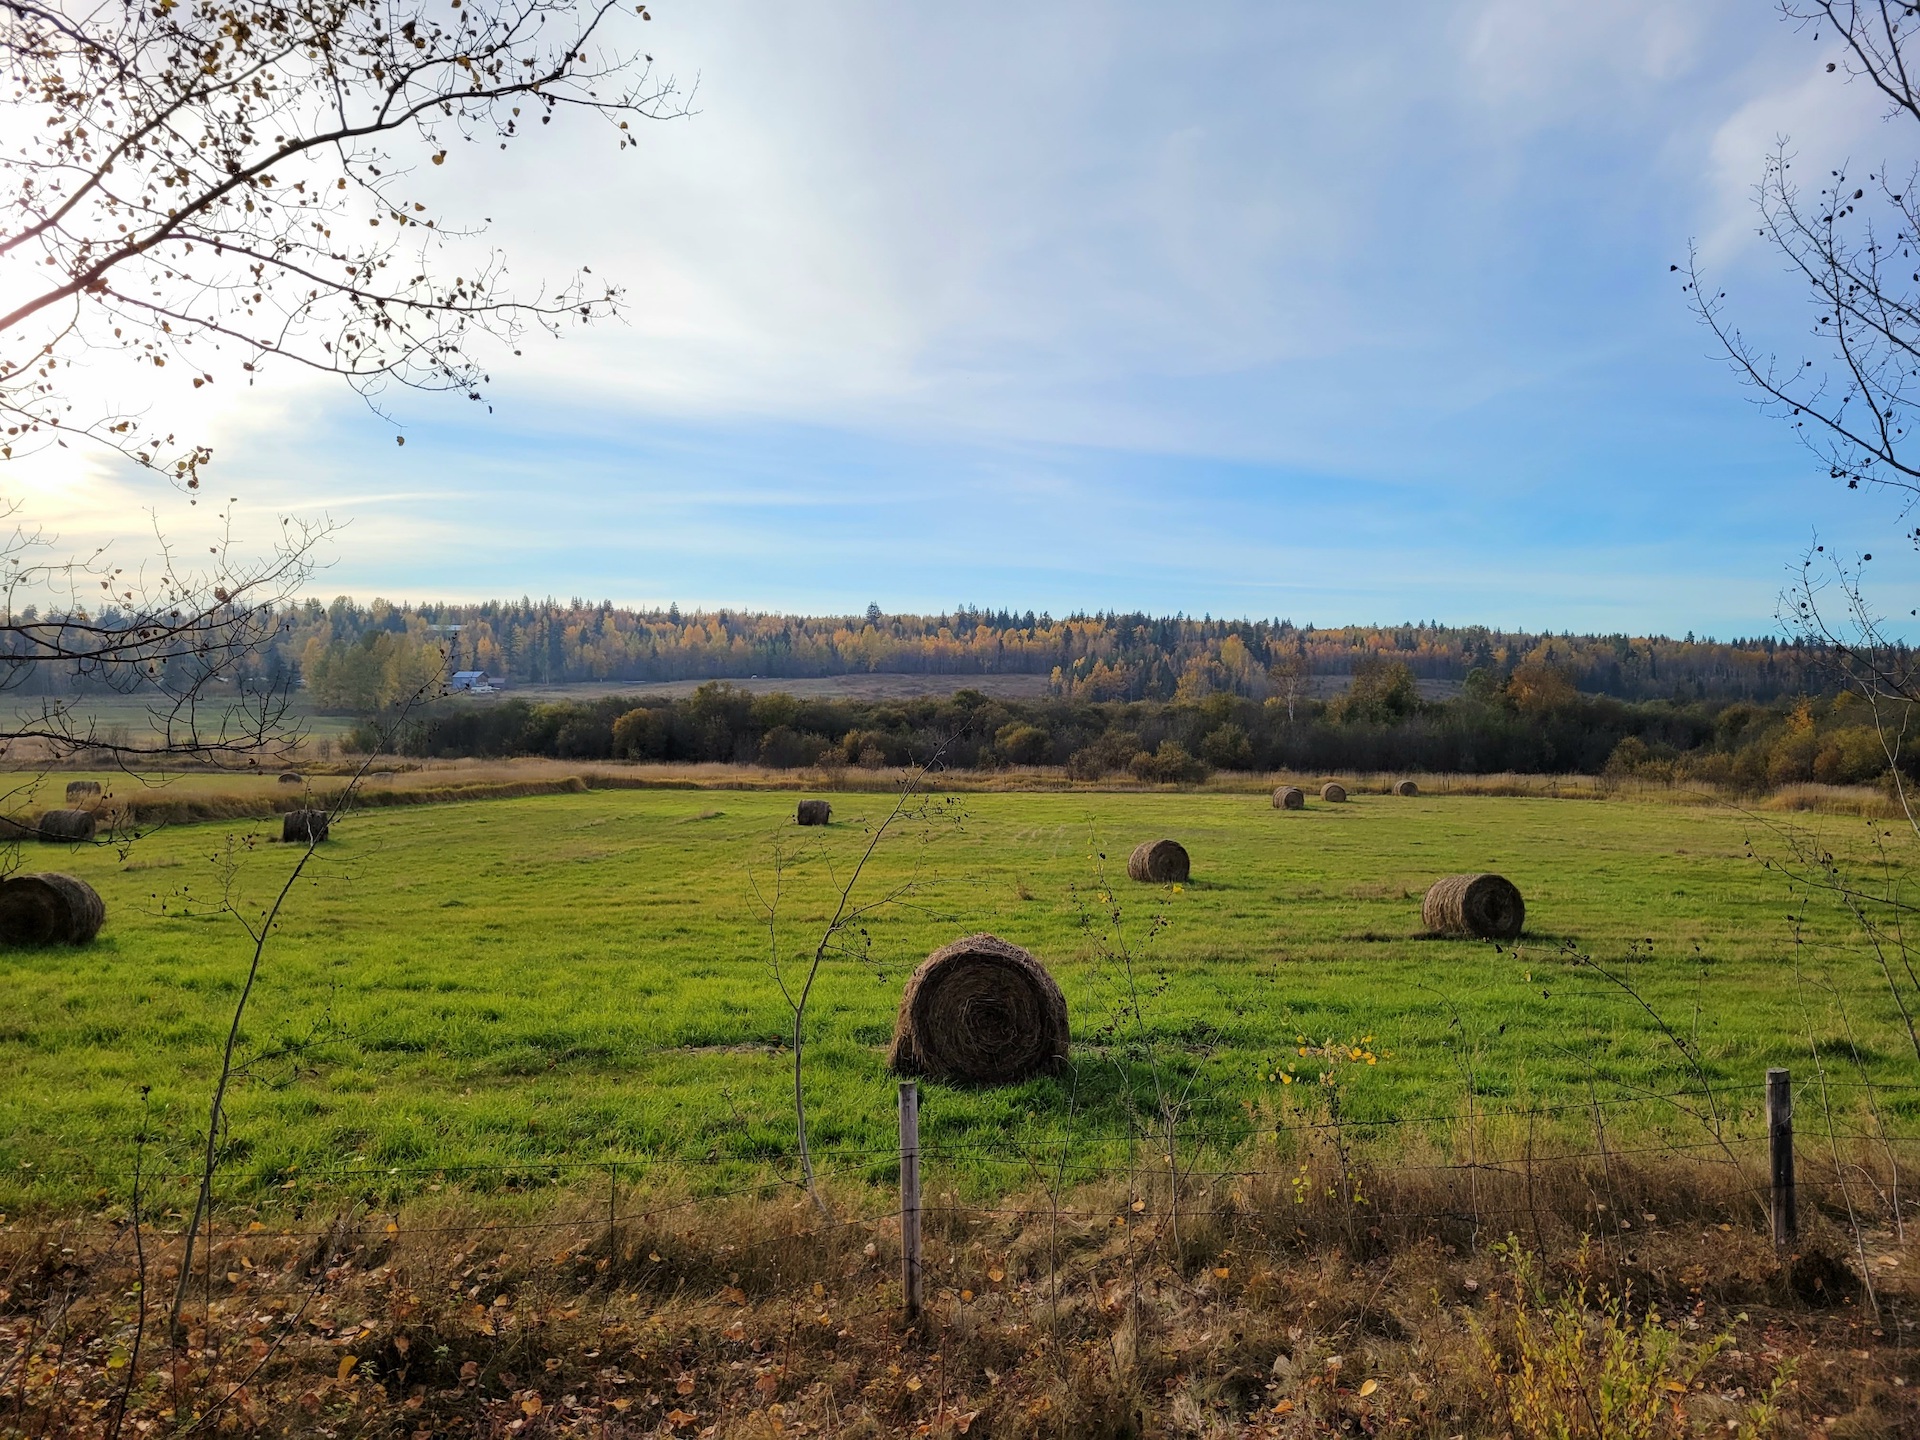 hay bales on a sunny field in late fall